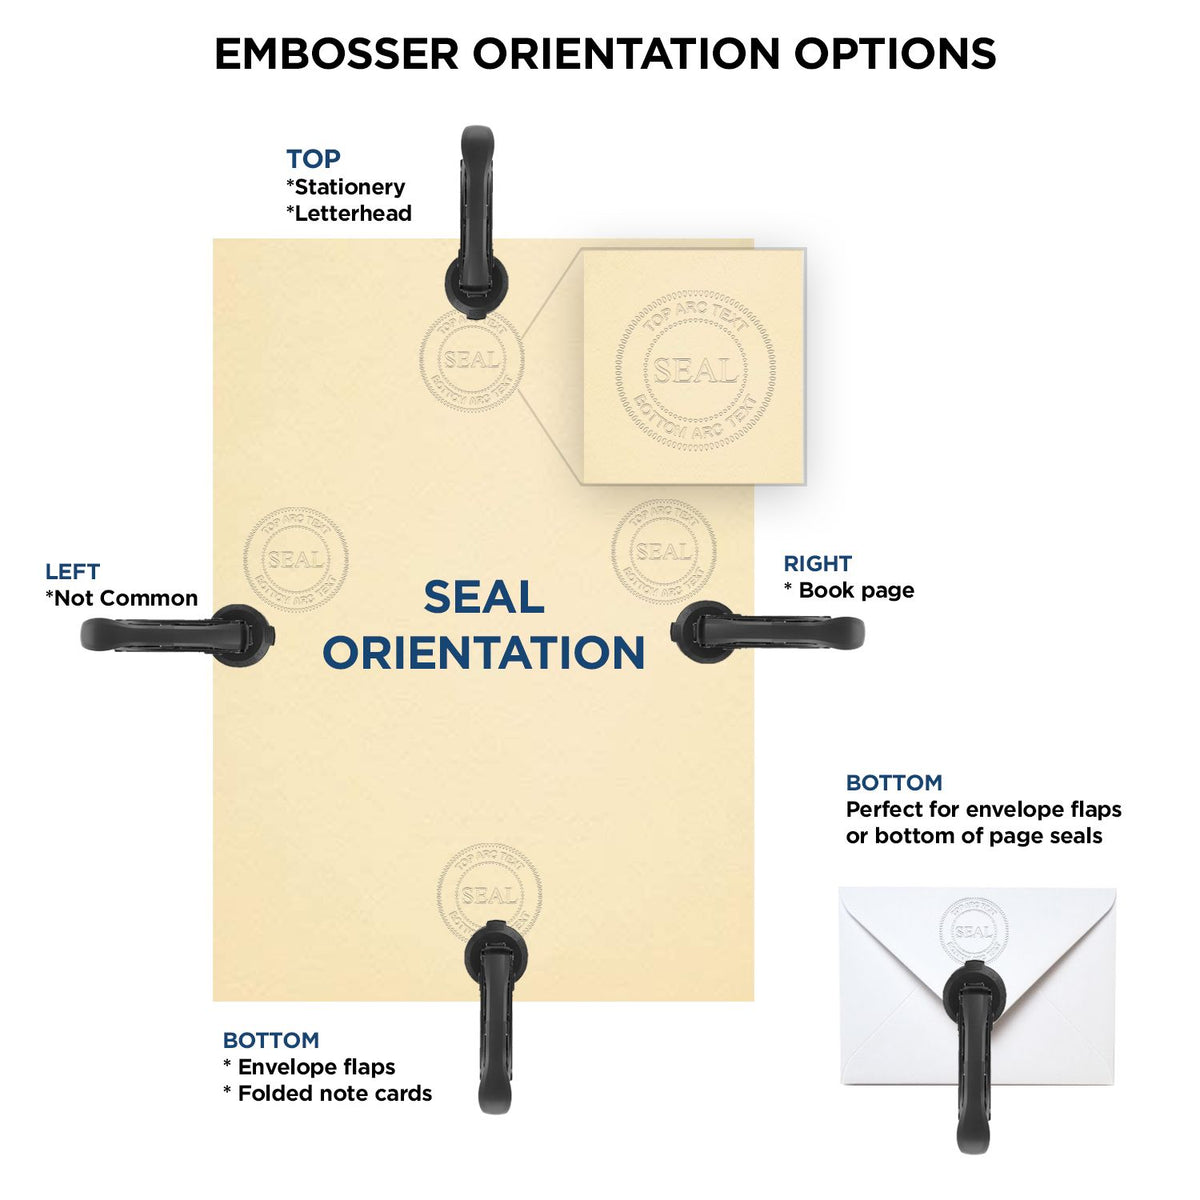 An infographic for the Guam Desk Surveyor Seal Embosser showing embosser orientation, this is showing examples of a top, bottom, right and left insert.